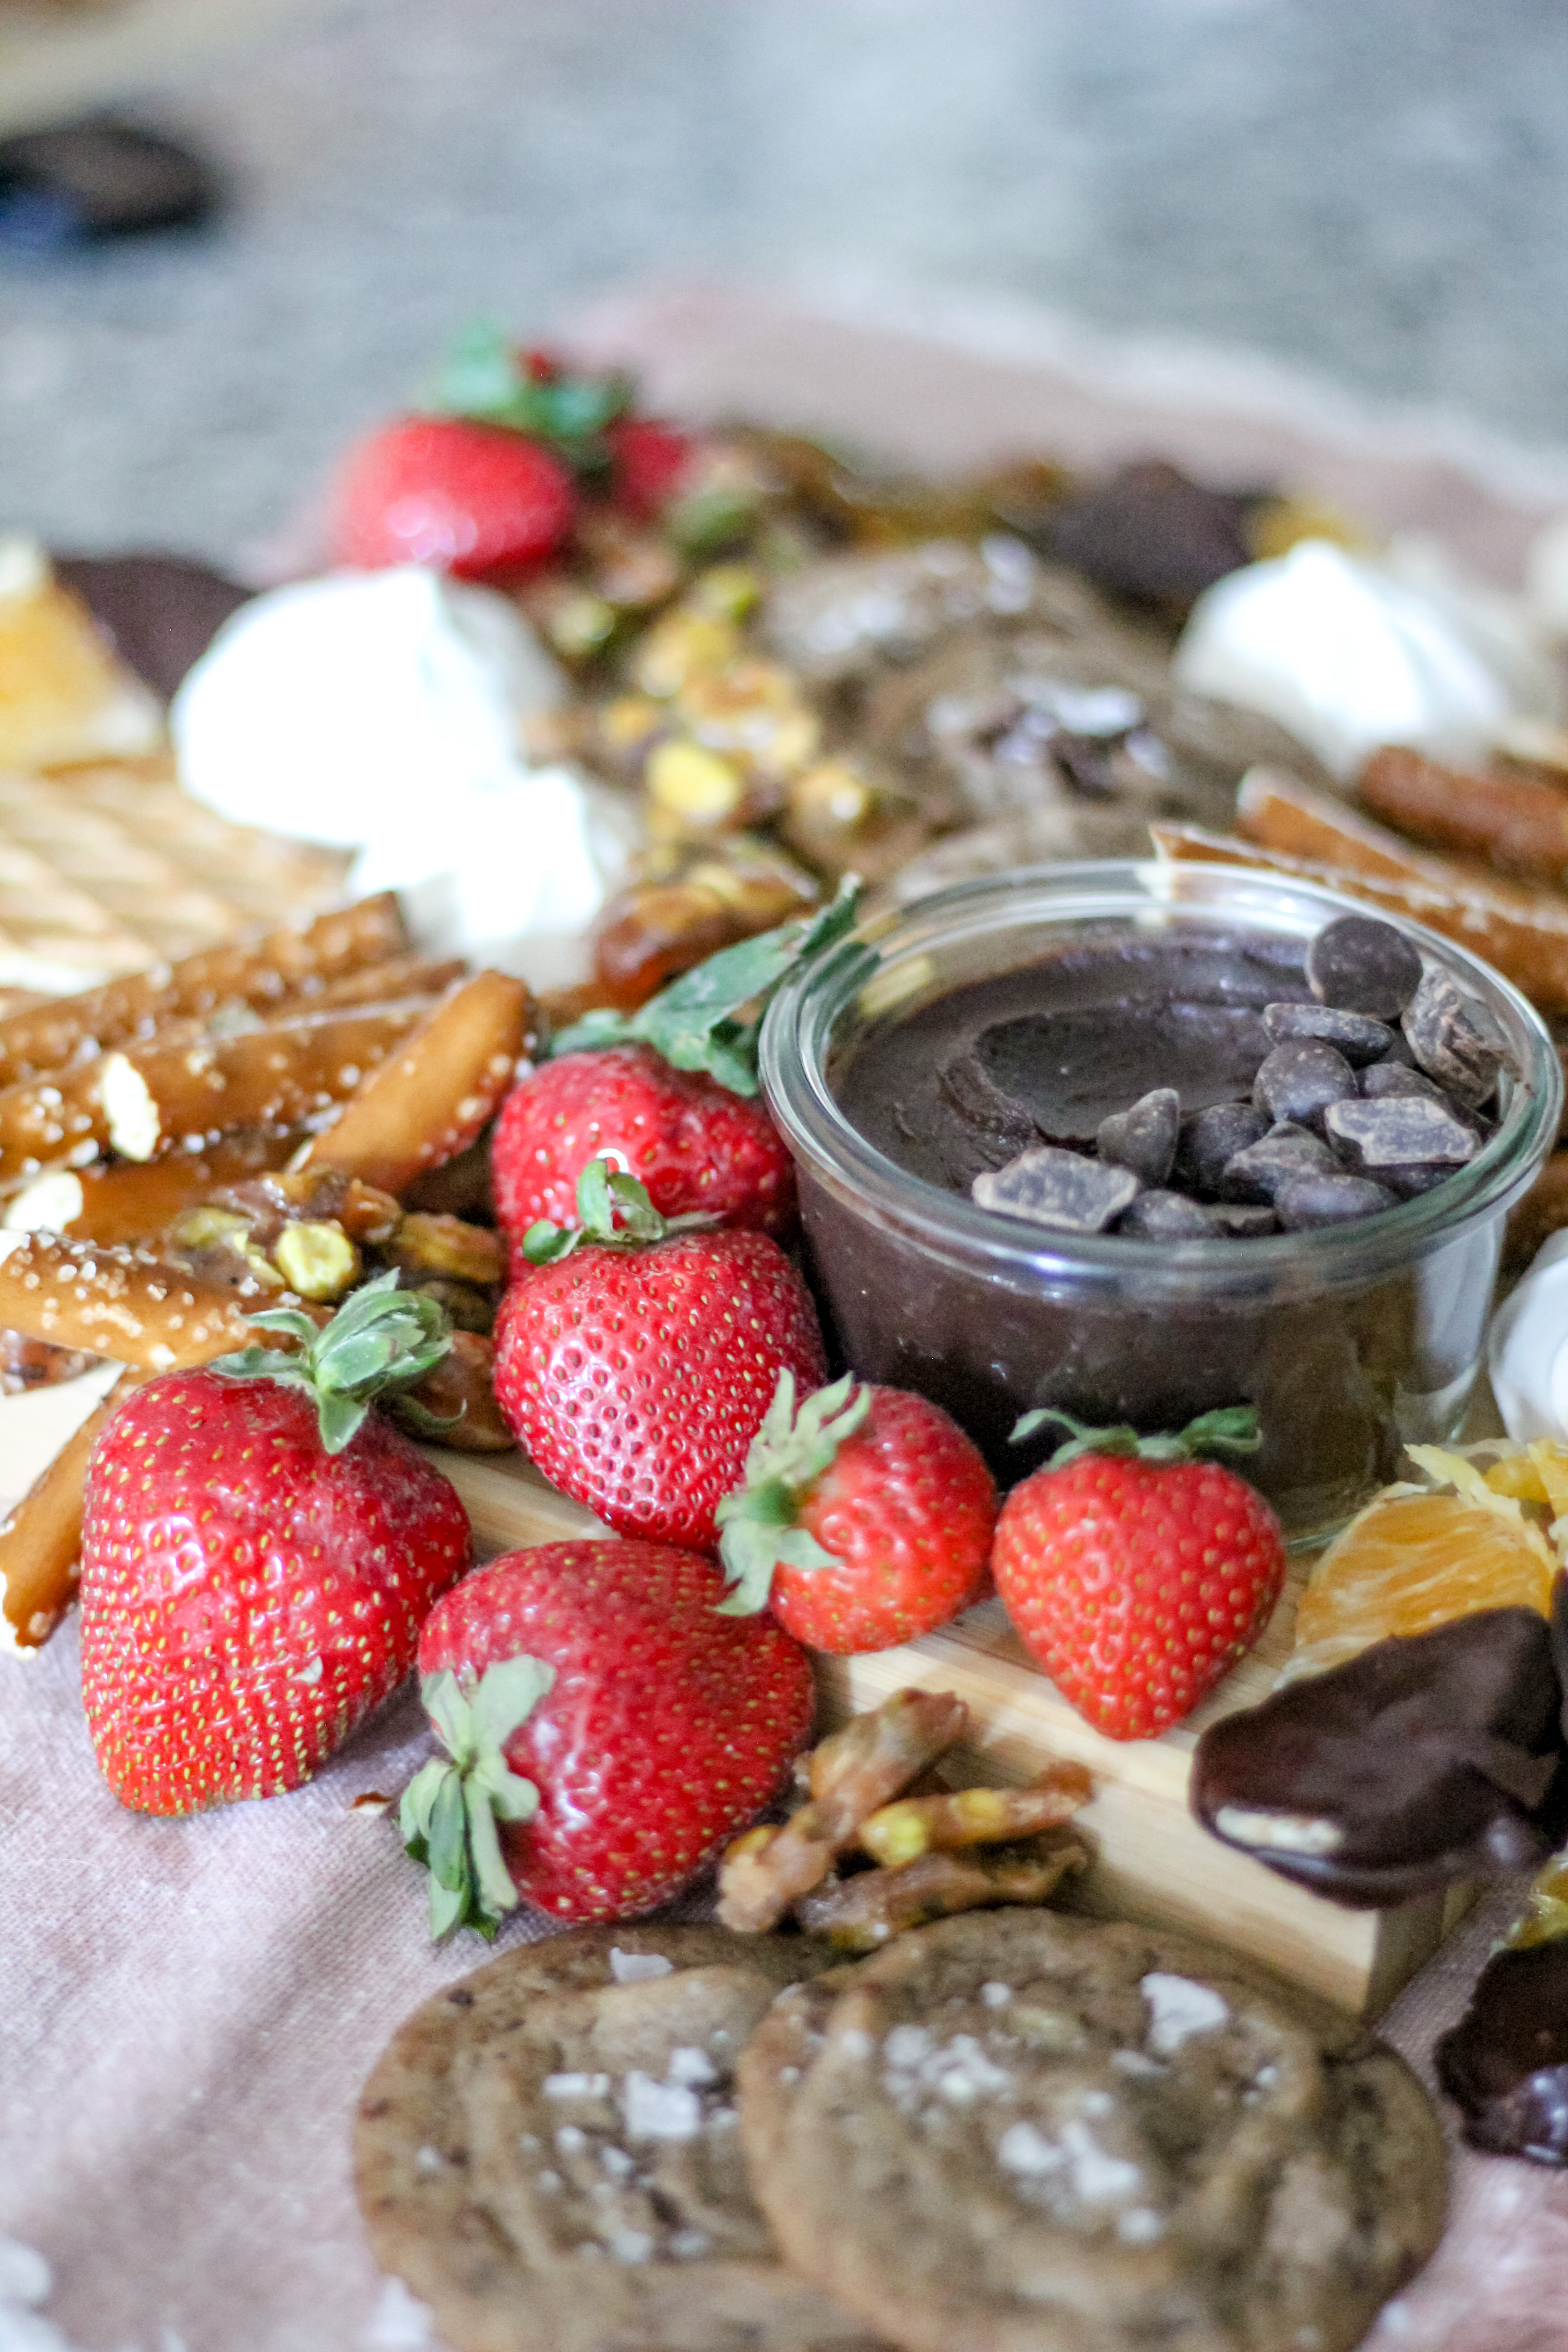 The Dessert Charcuterie Board That's Irresistibly Delicious